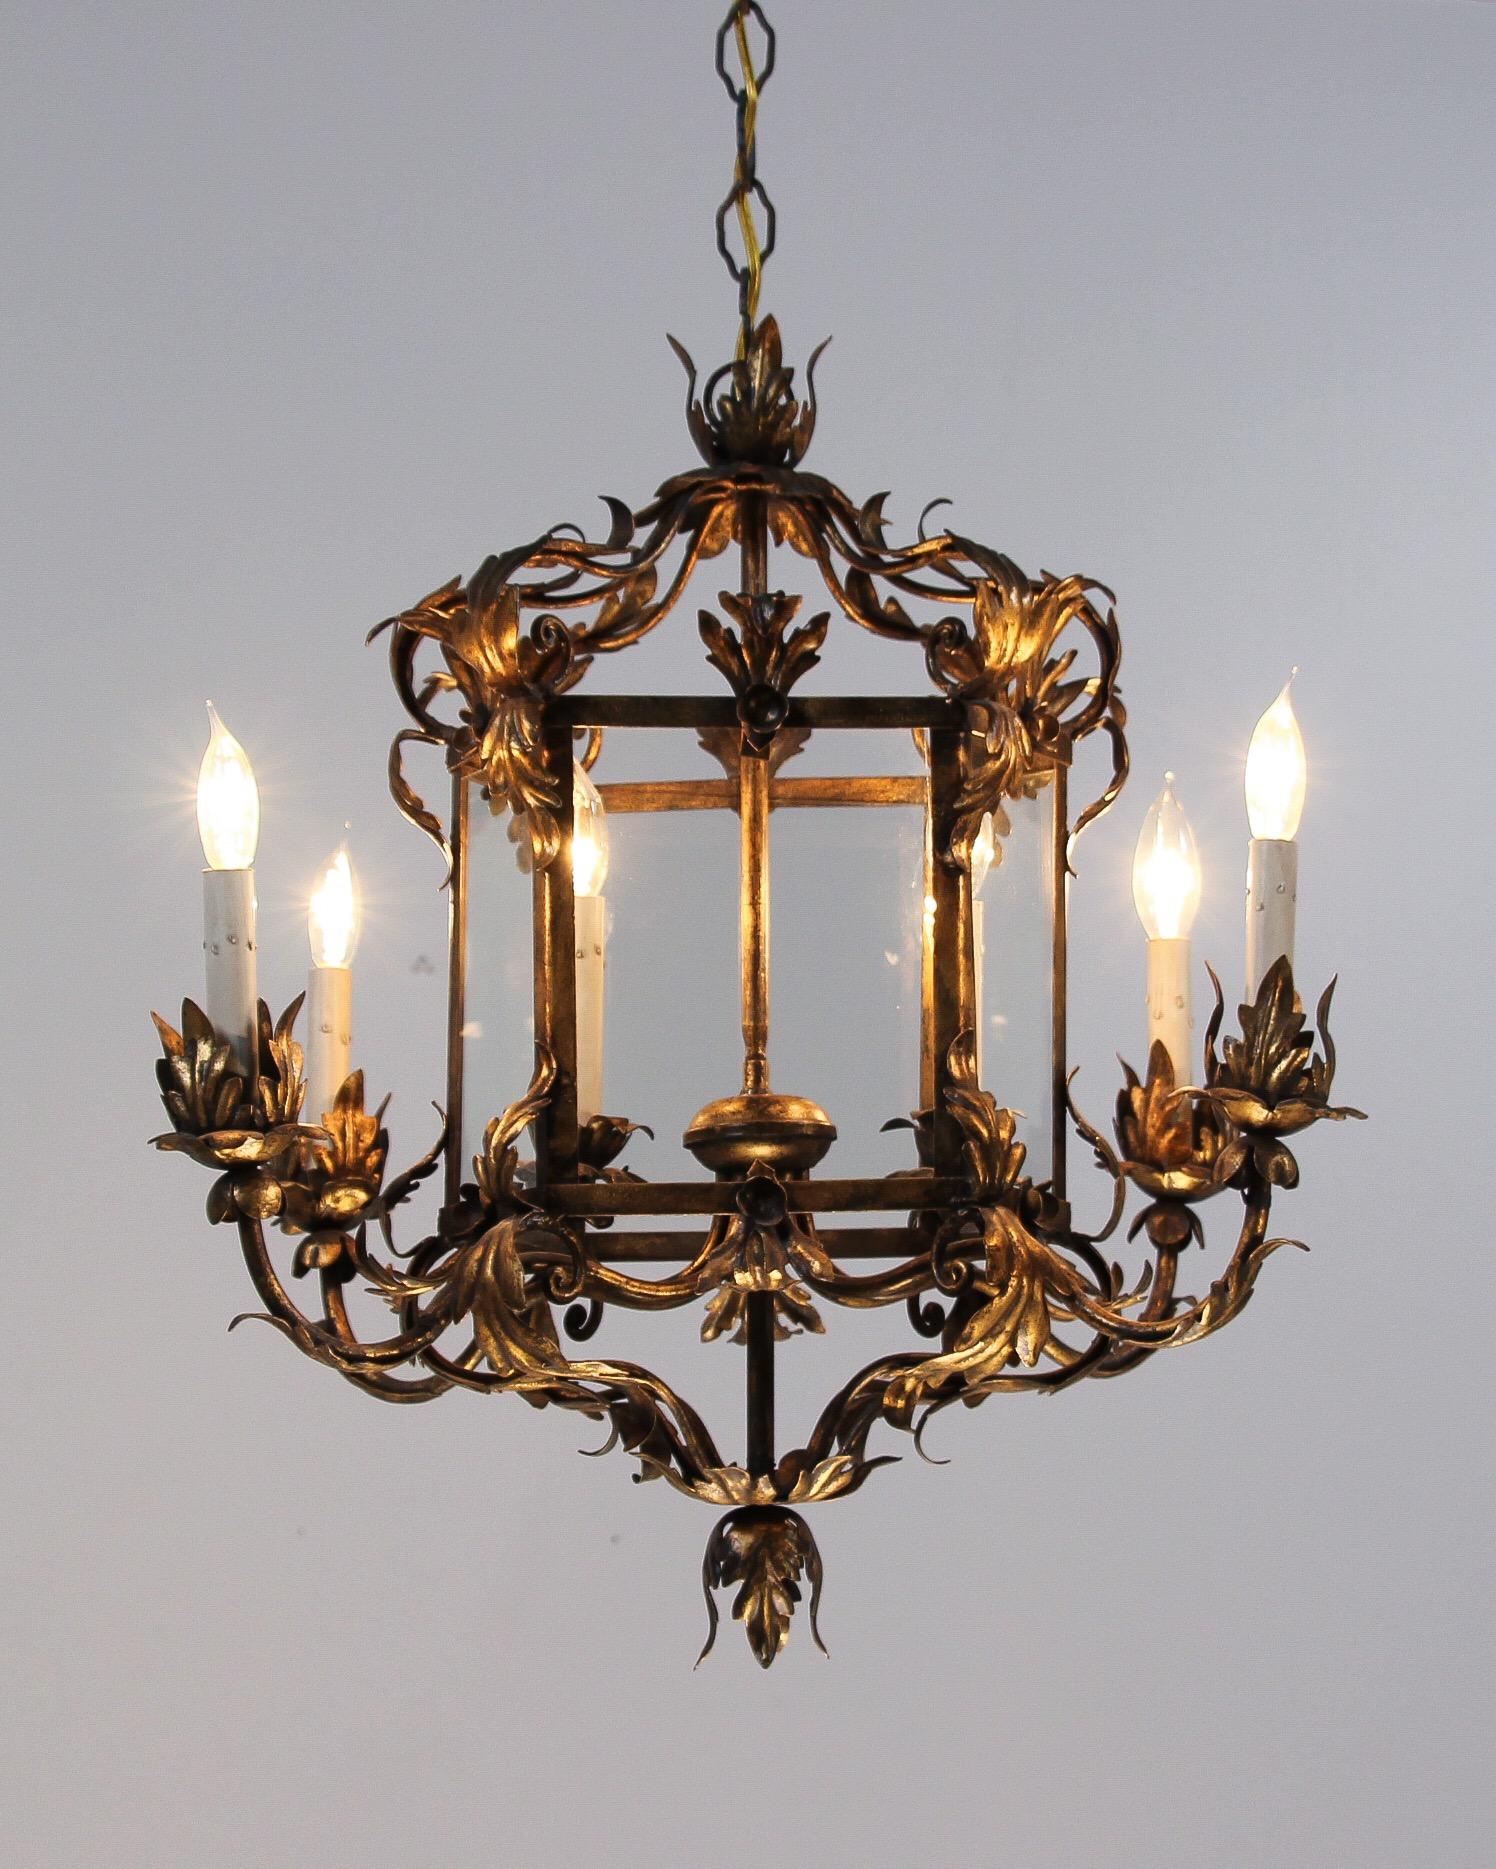 Beautiful, 1950s Italian gilt iron chandelier in the Provincial style. The chandelier features 6 arms flowing gracefully from a glass paneled lantern-shaped center. The chandelier’s design and scale would make it a wonderful addition wherever it may